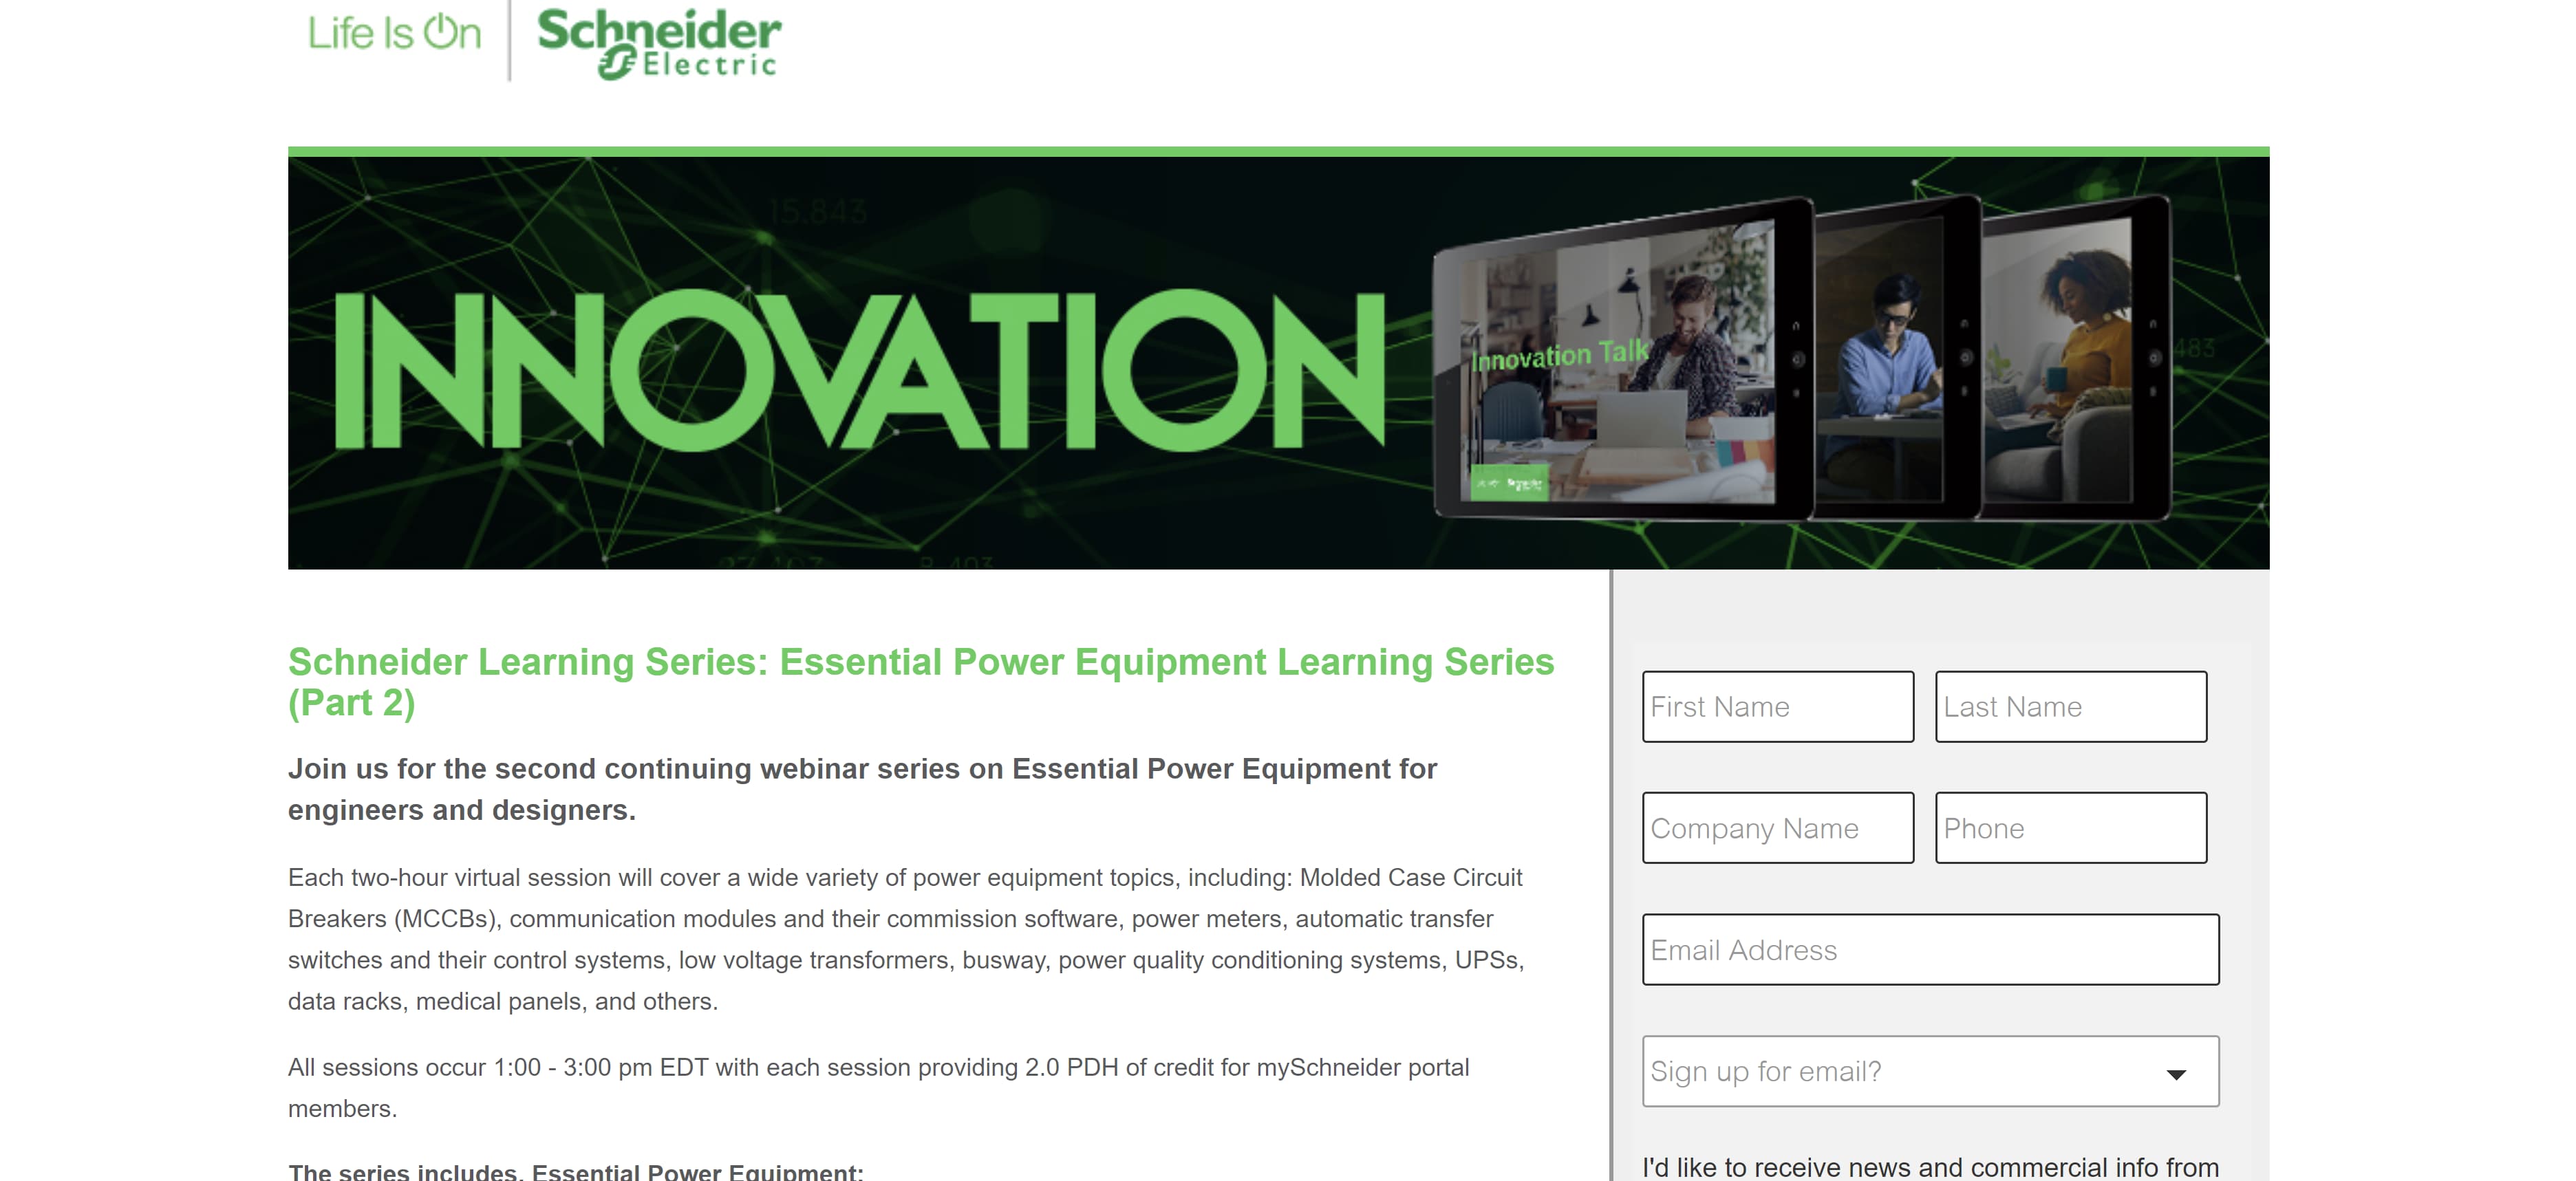 Webinar landing page example from Schneider Electric